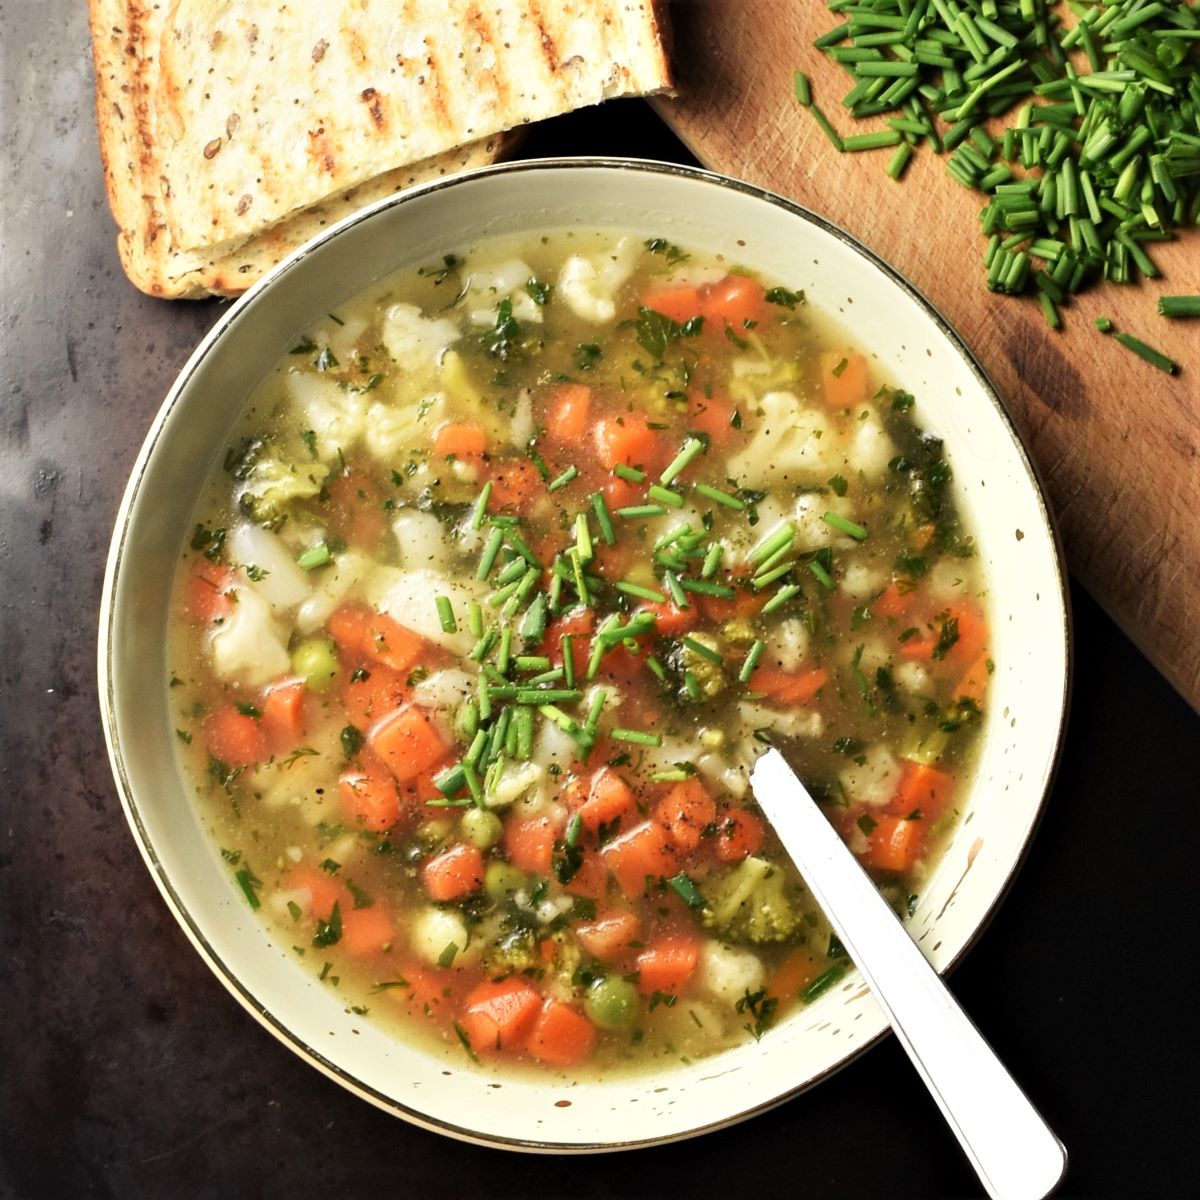 Chunky vegetable soup in green bowl with spoon, fresh chives and grilled bread in background.